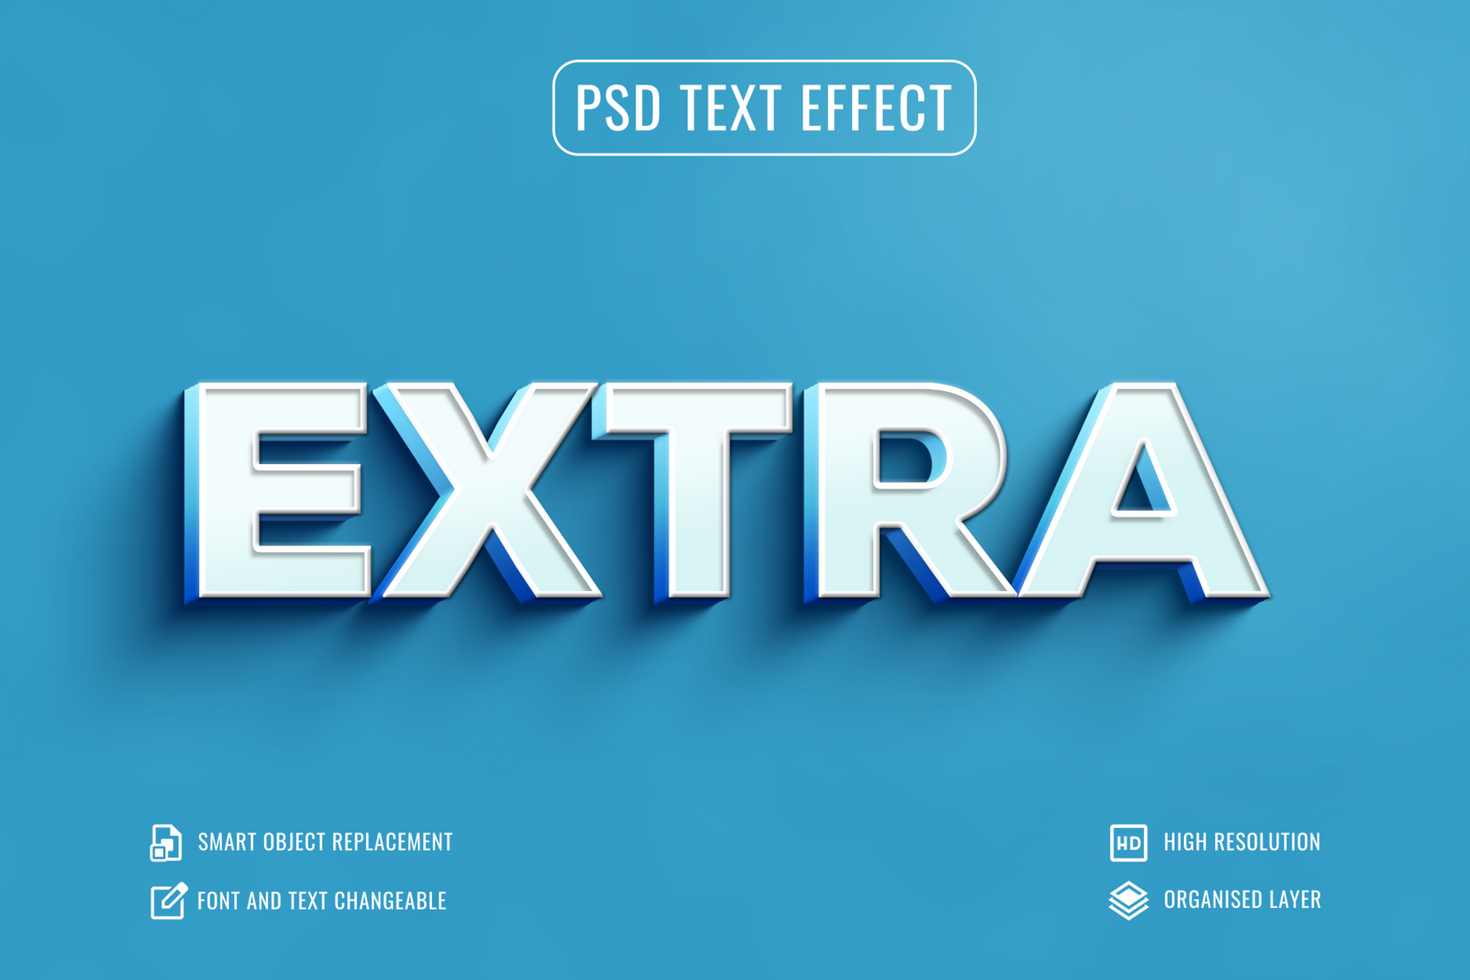 3d text effect with blue background psd